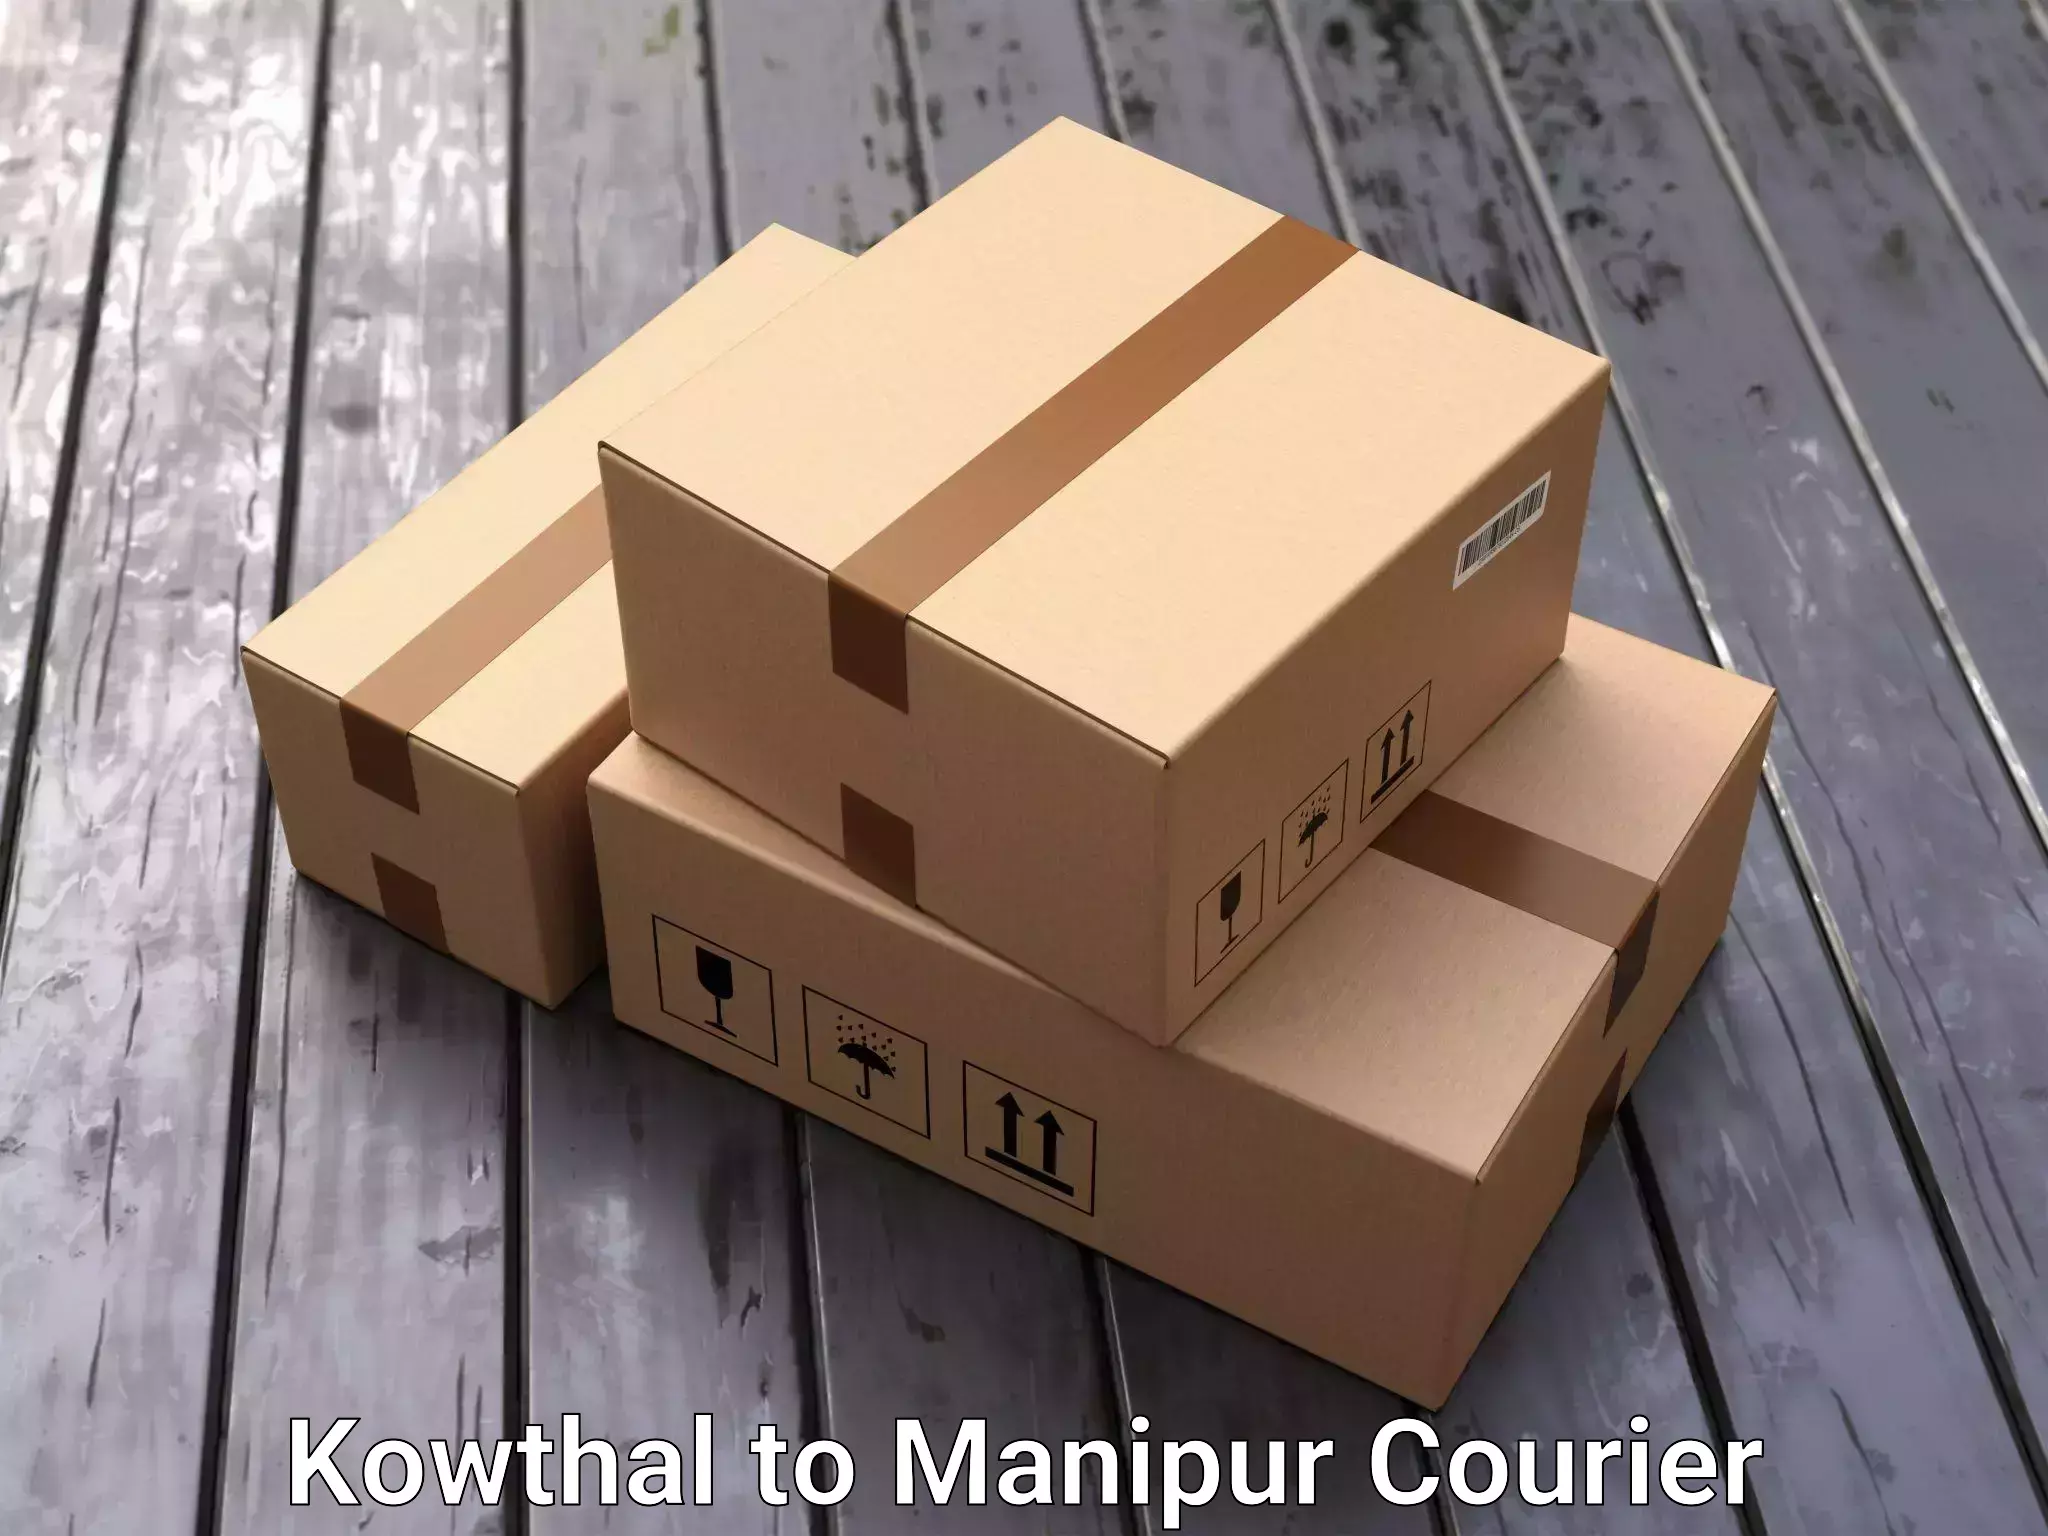 Professional relocation services Kowthal to Manipur